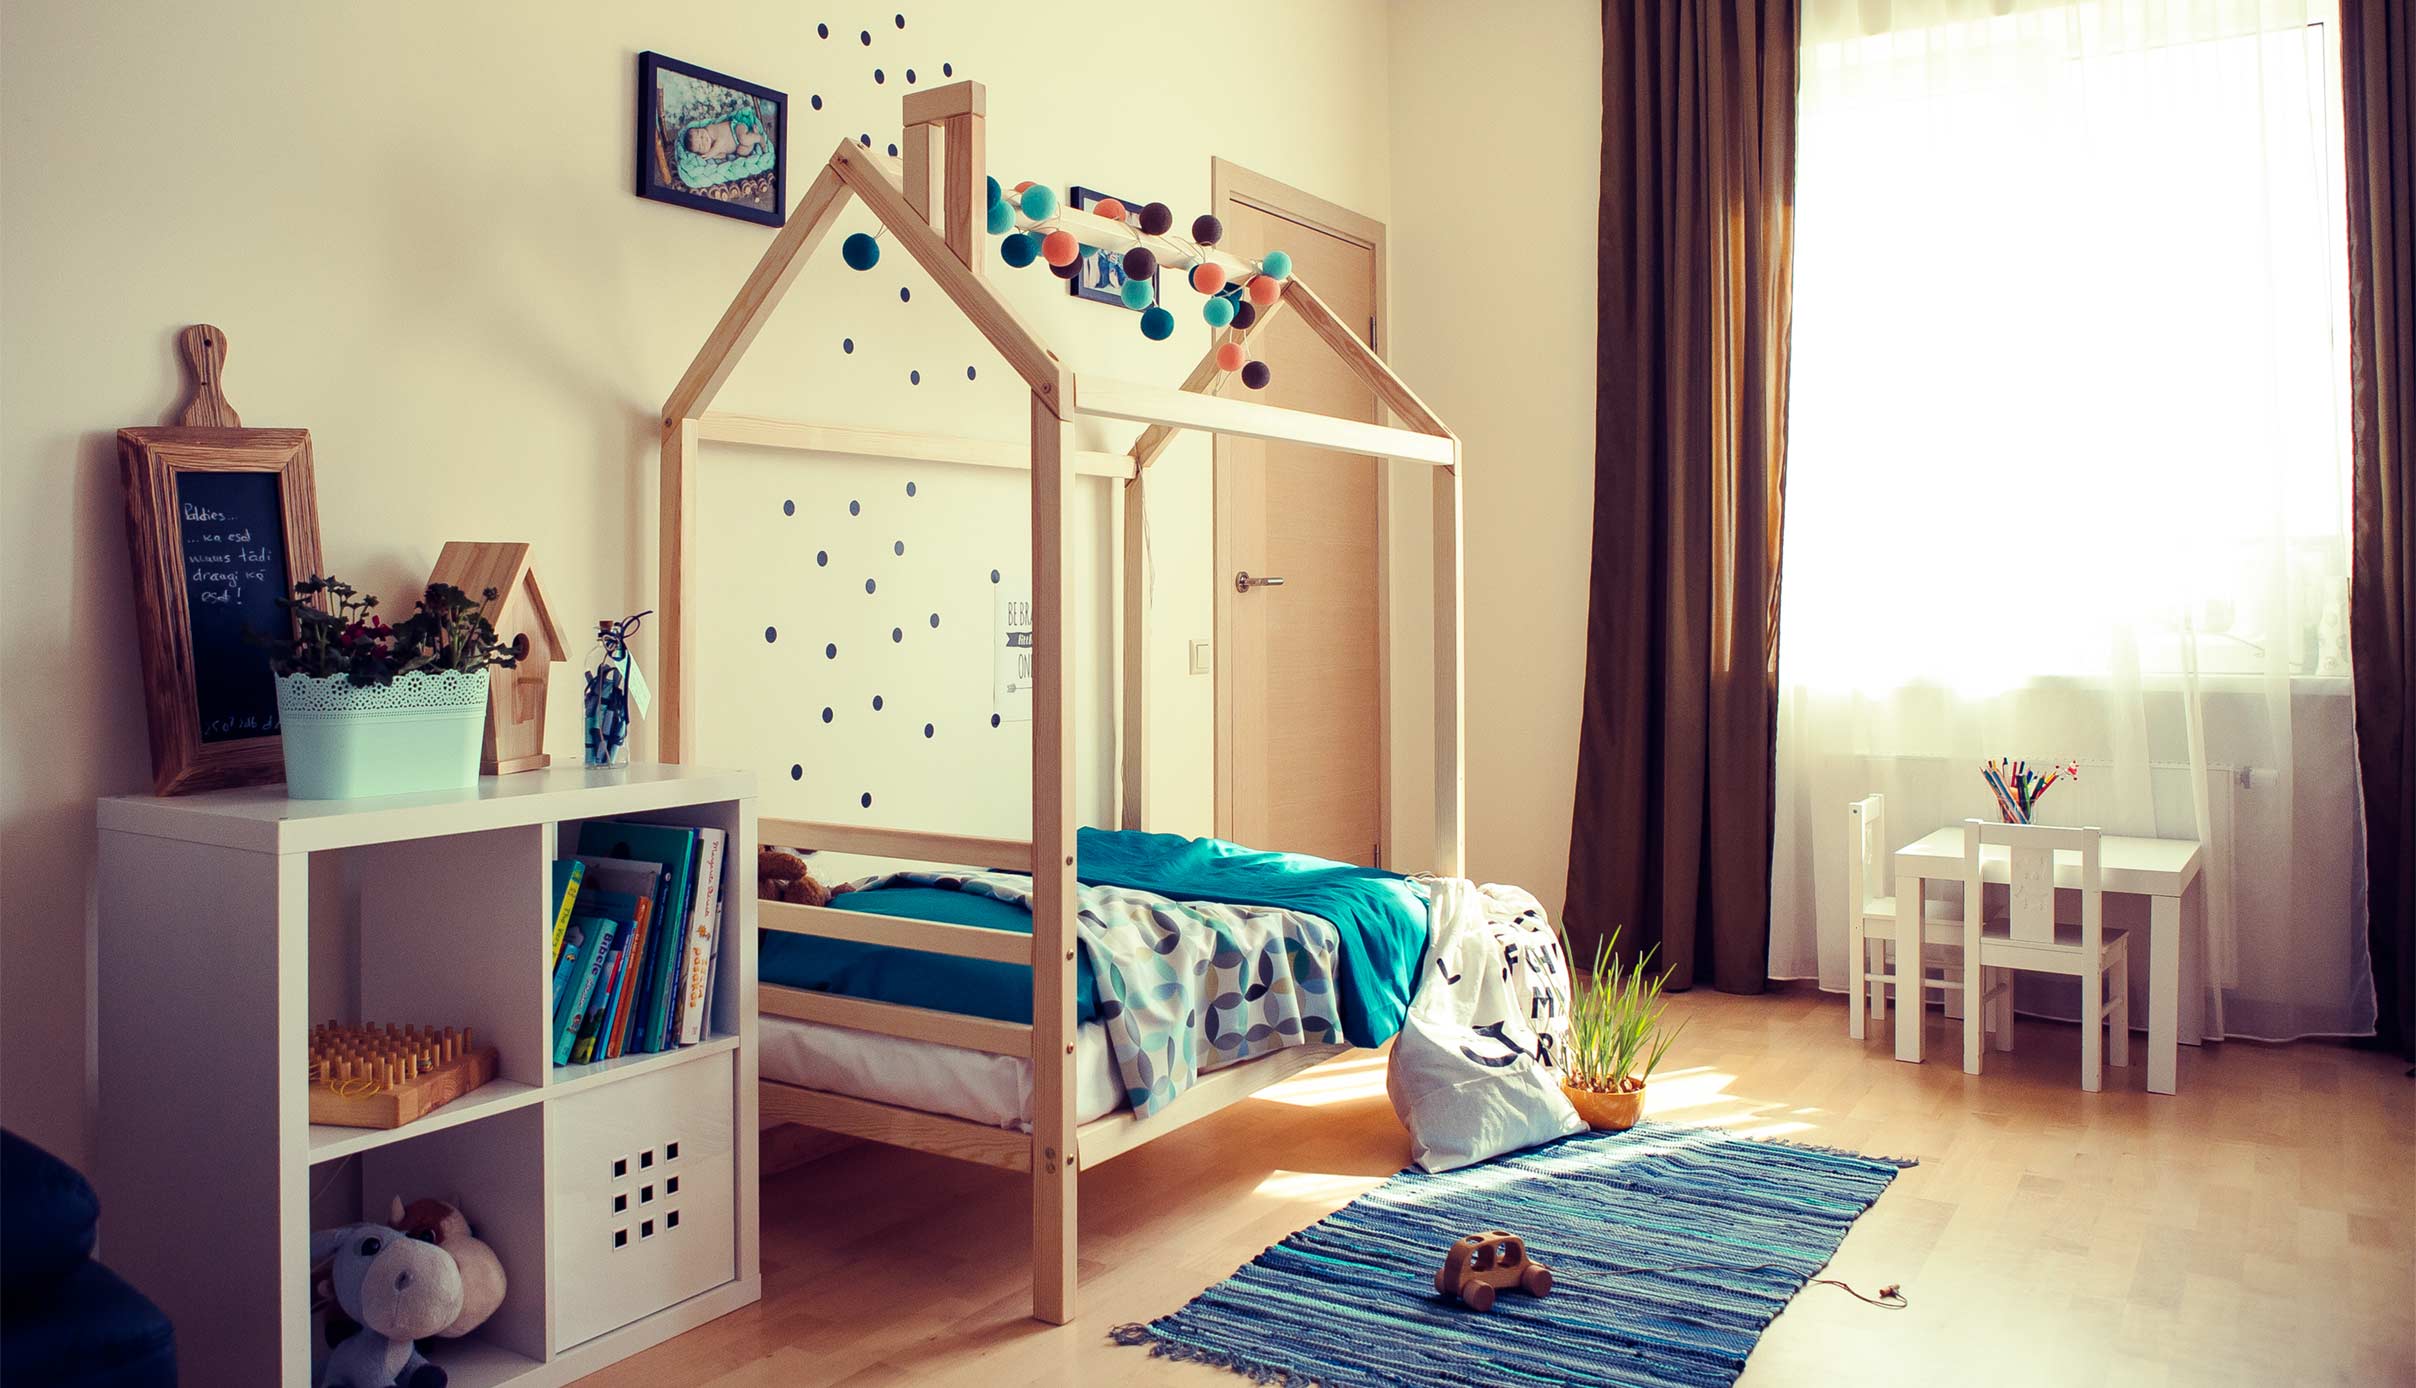 A child's room with a wooden bed and a toy.